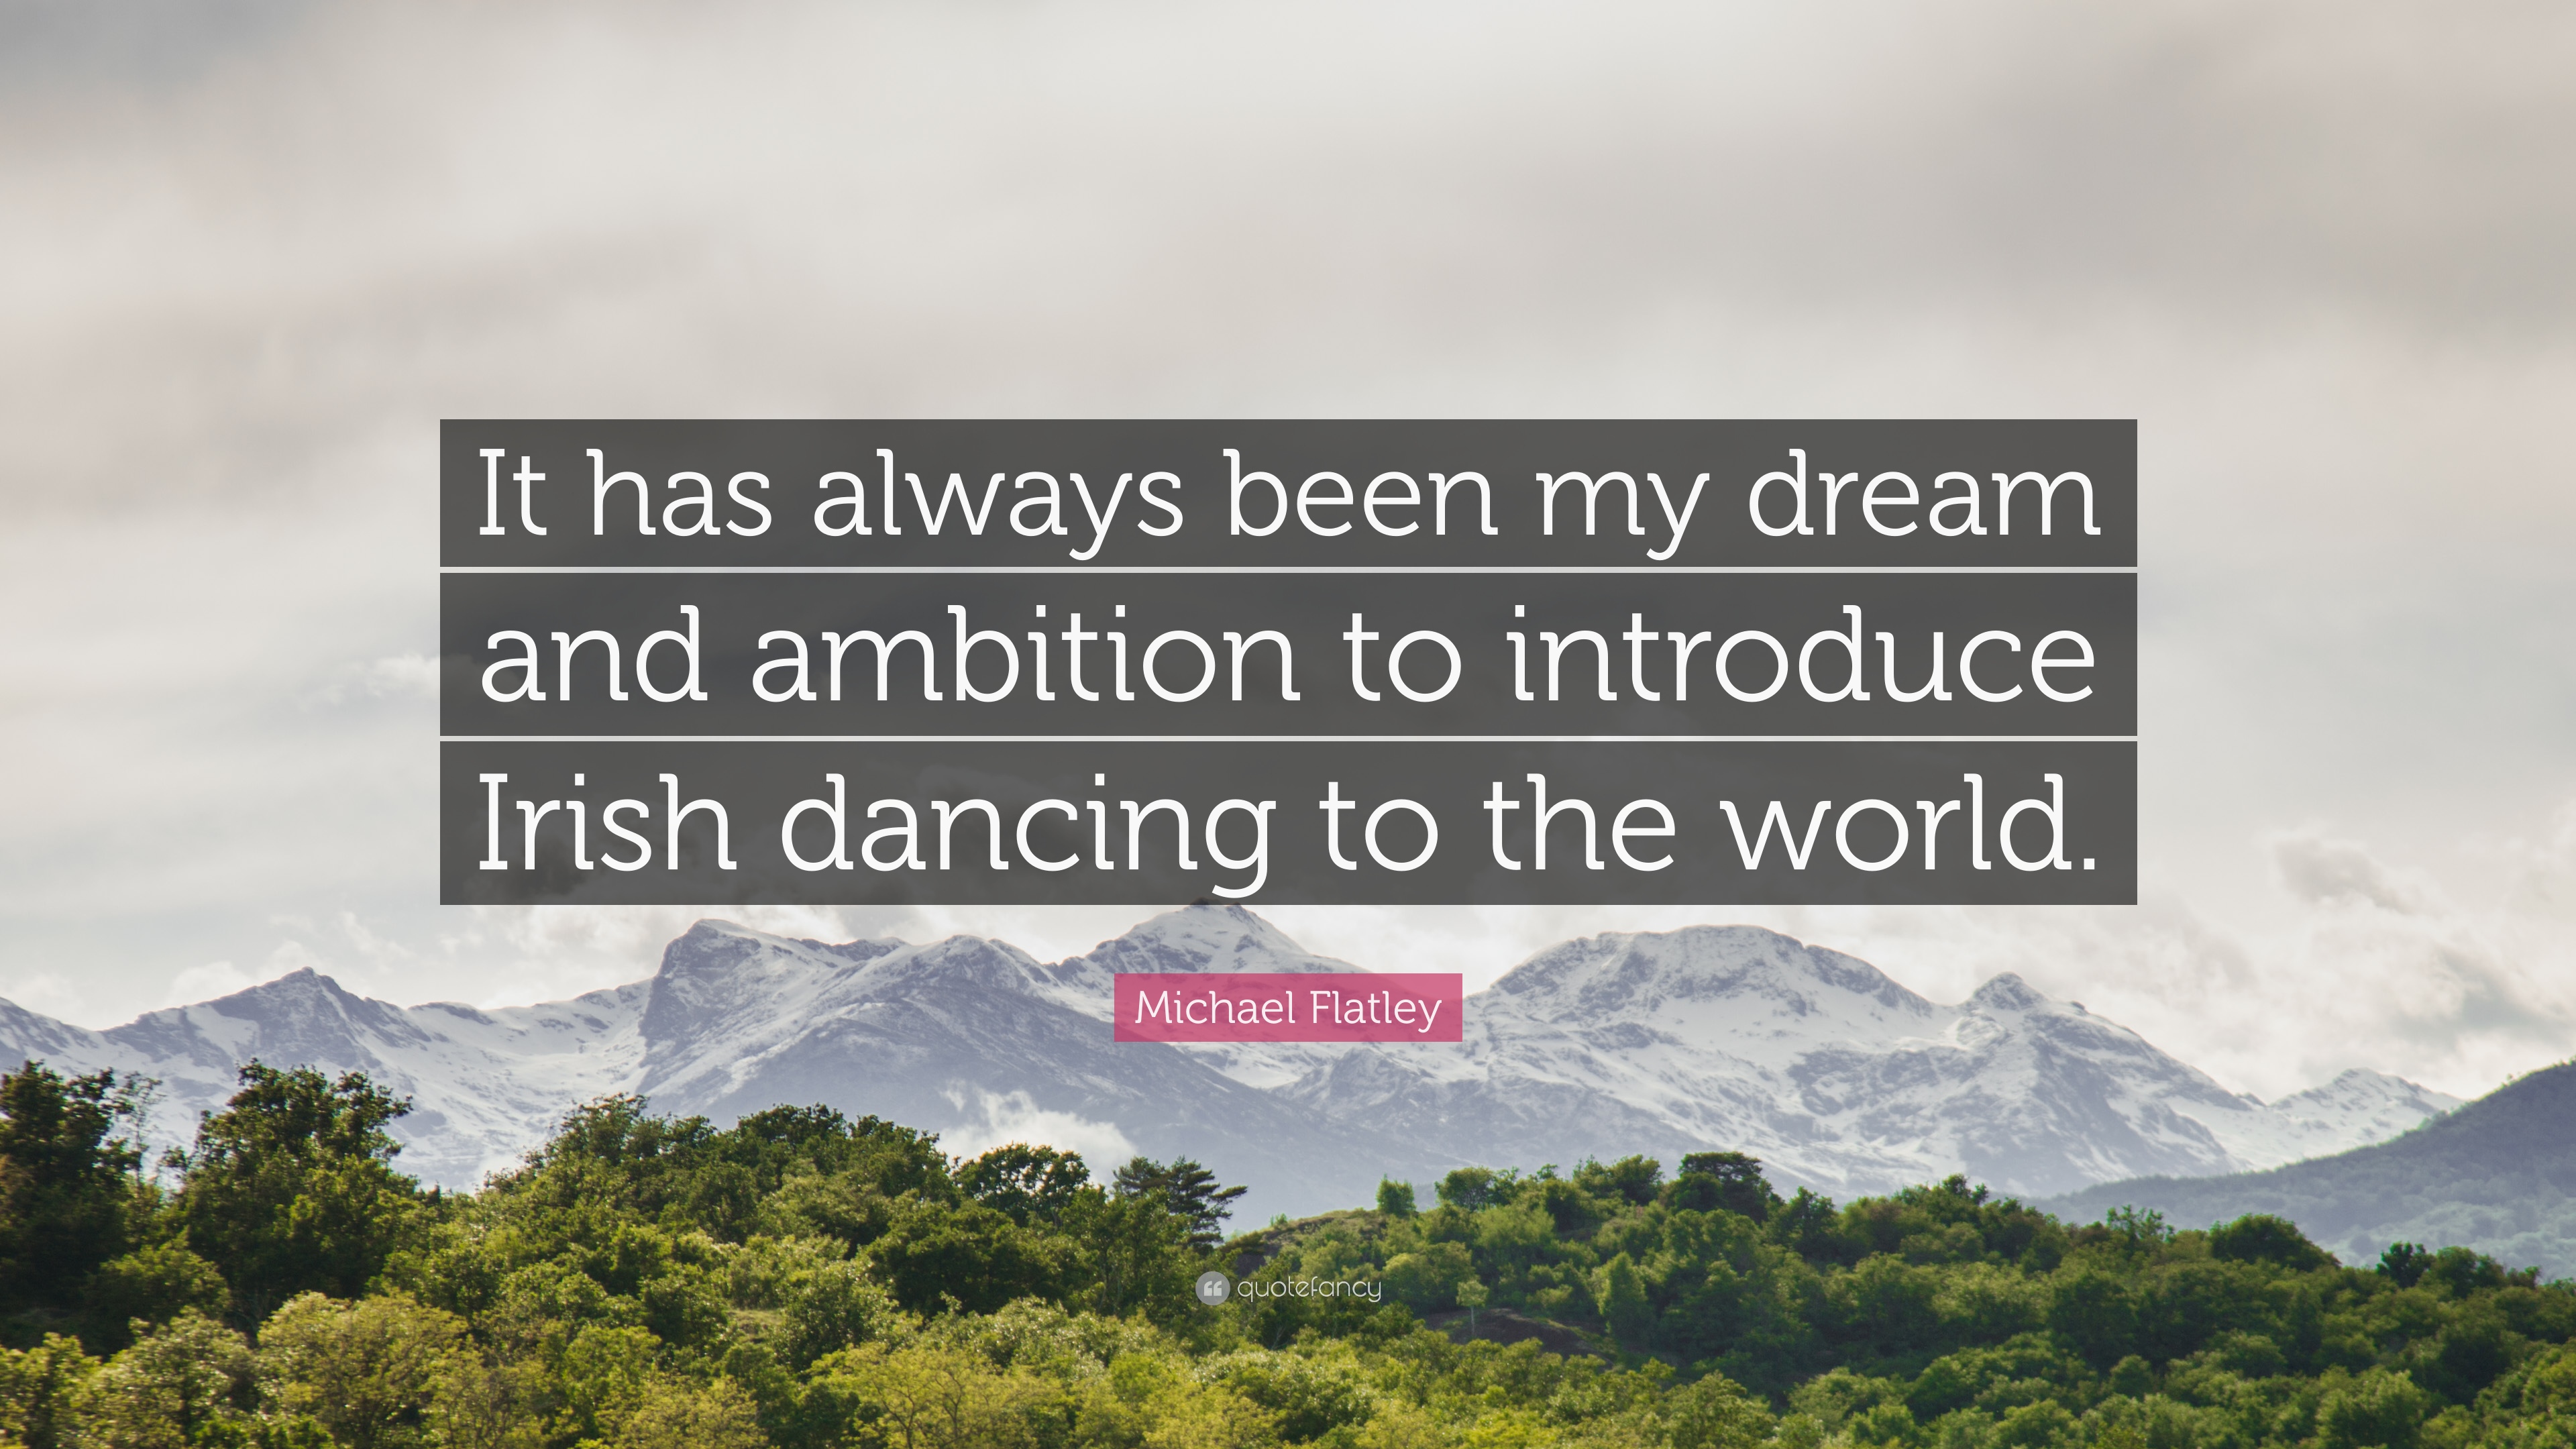 Michael Flatley Quote: “It has always been my dream and ambition